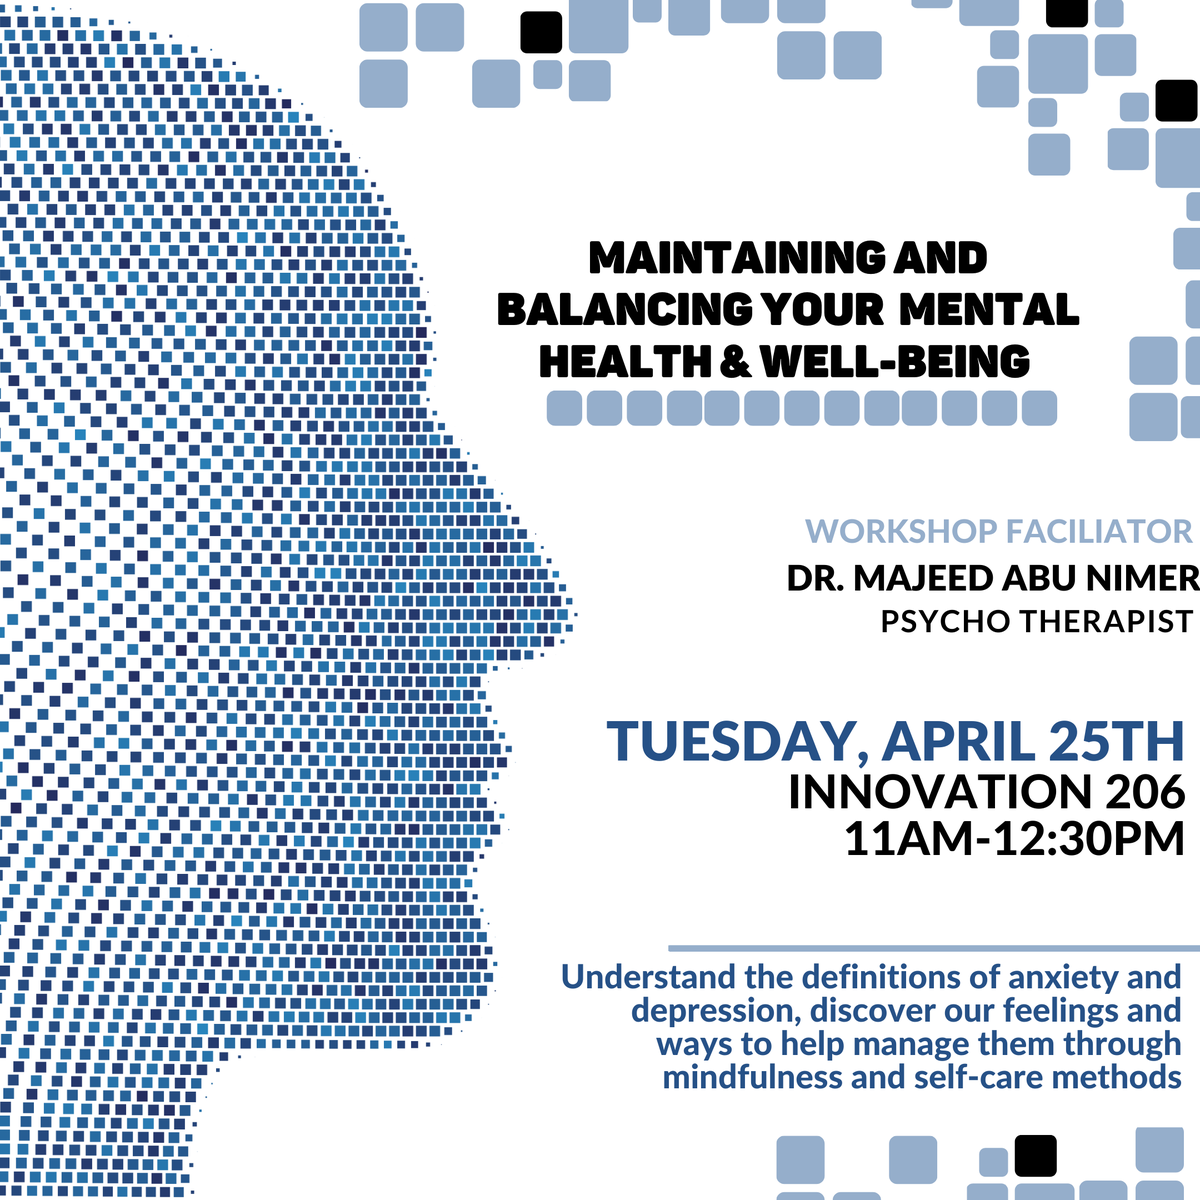 EIP Alumni at Mason join us Tuesday, April 25 in Innovation, Room 206​ from 11 a.m.– 12:30 p.m. We are providing FREE FOOD and a workshop on Maintaining and Balancing YOUR Mental Health & Well-Being. You can bring friends and other guests! See you there!